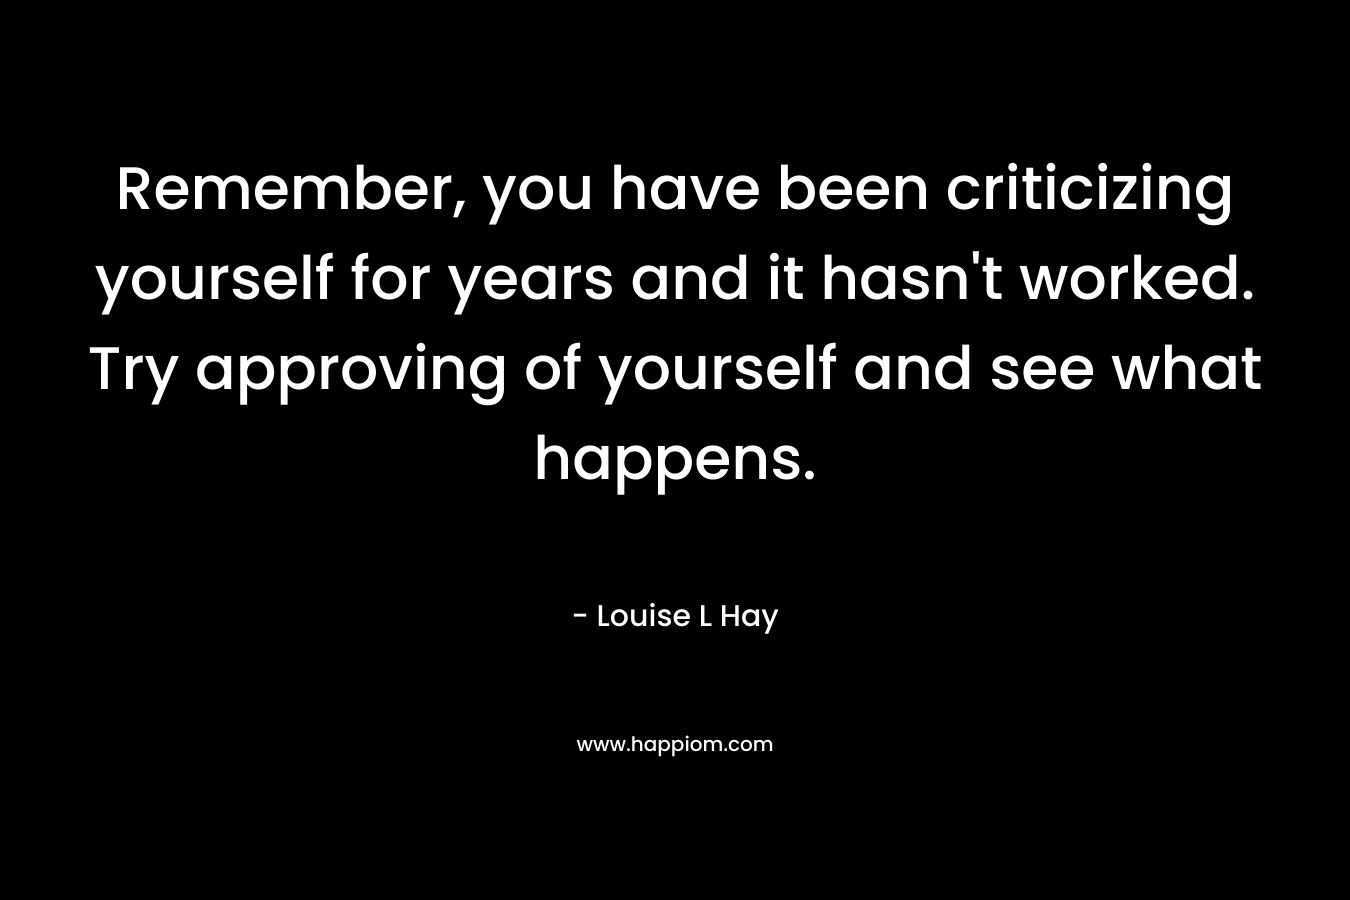 Remember, you have been criticizing yourself for years and it hasn’t worked. Try approving of yourself and see what happens. – Louise L Hay